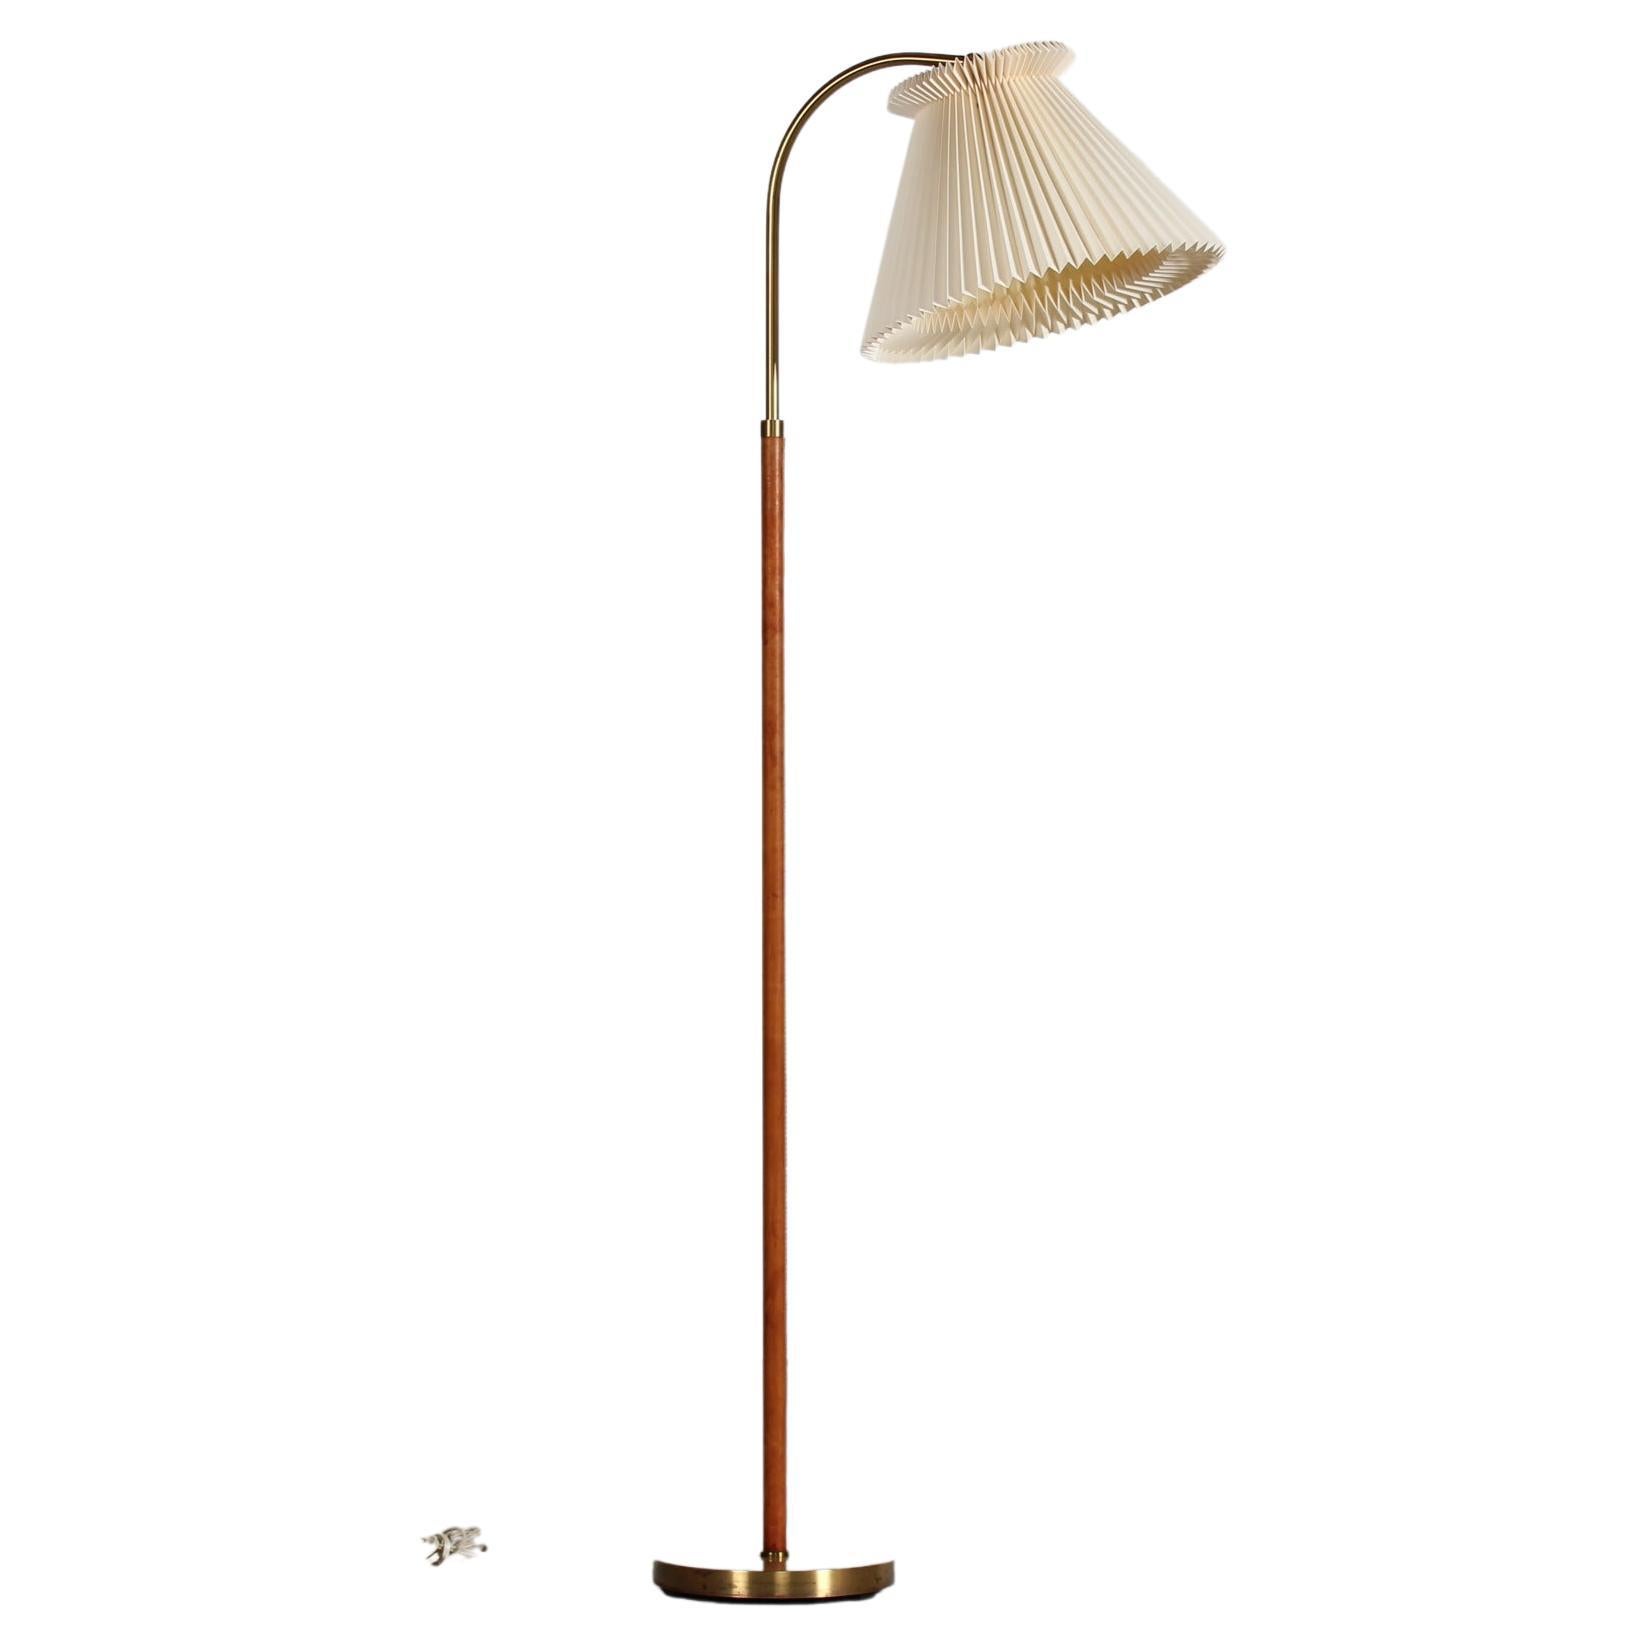 Paavo Tynell Style Leather + Brass Floor Lamp with Original Le Klint Shade 1950s